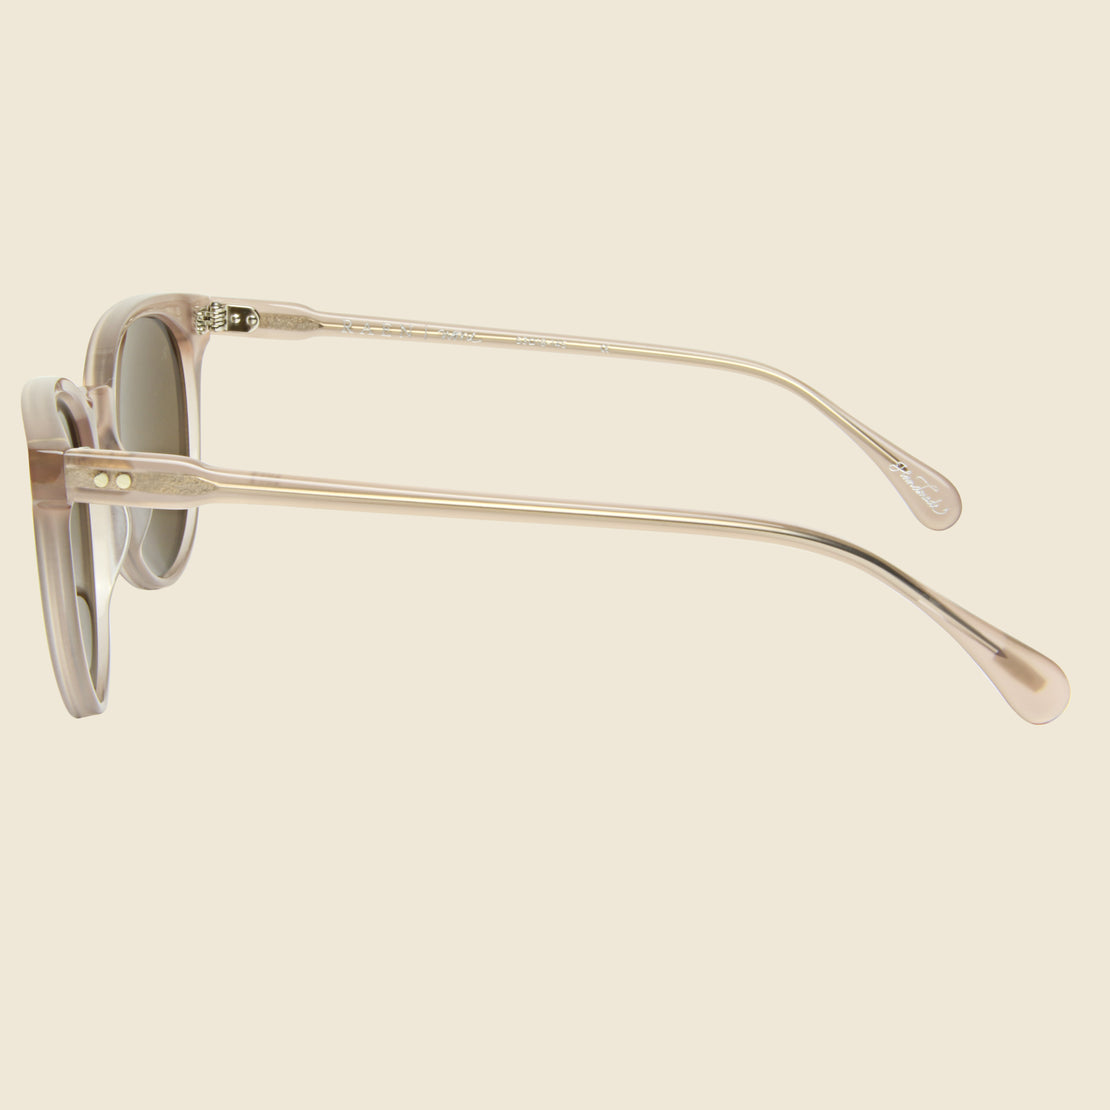 Norie Sunglasses - Rose/Brown Silver Mirror - Raen - STAG Provisions - W - Accessories - Eyewear